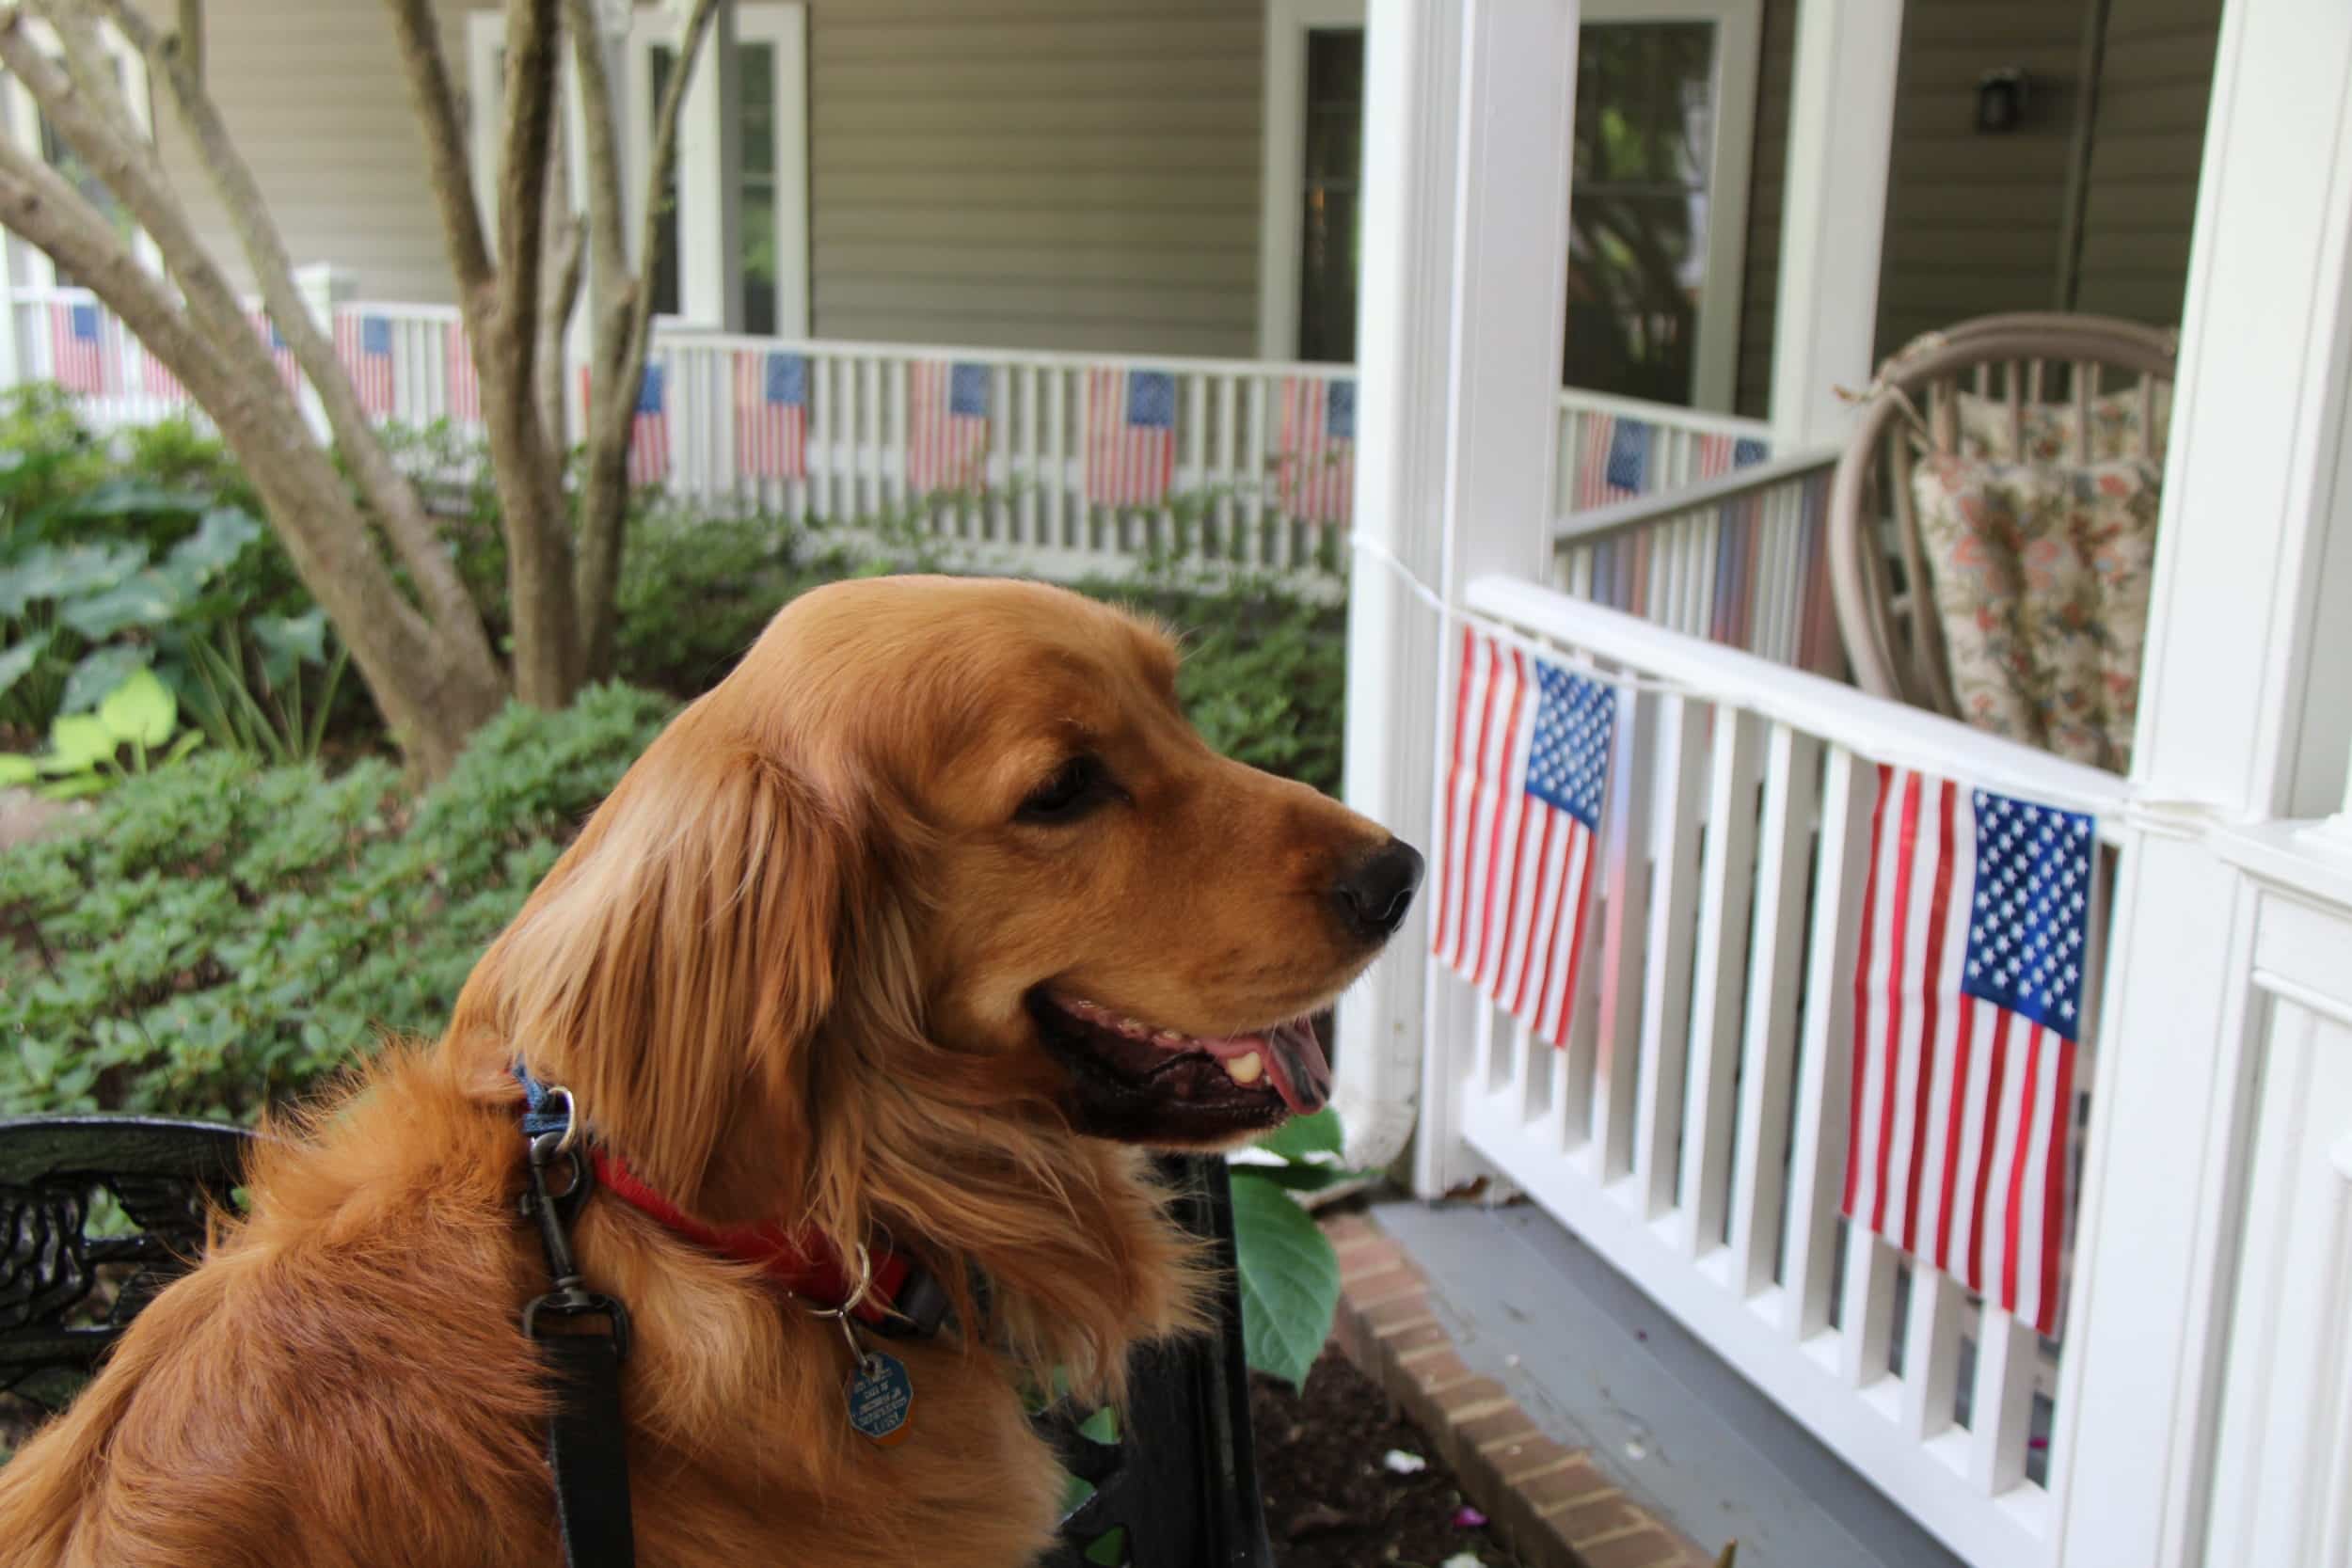 Kensington Park dog Carson in front of Flag-decorated porch